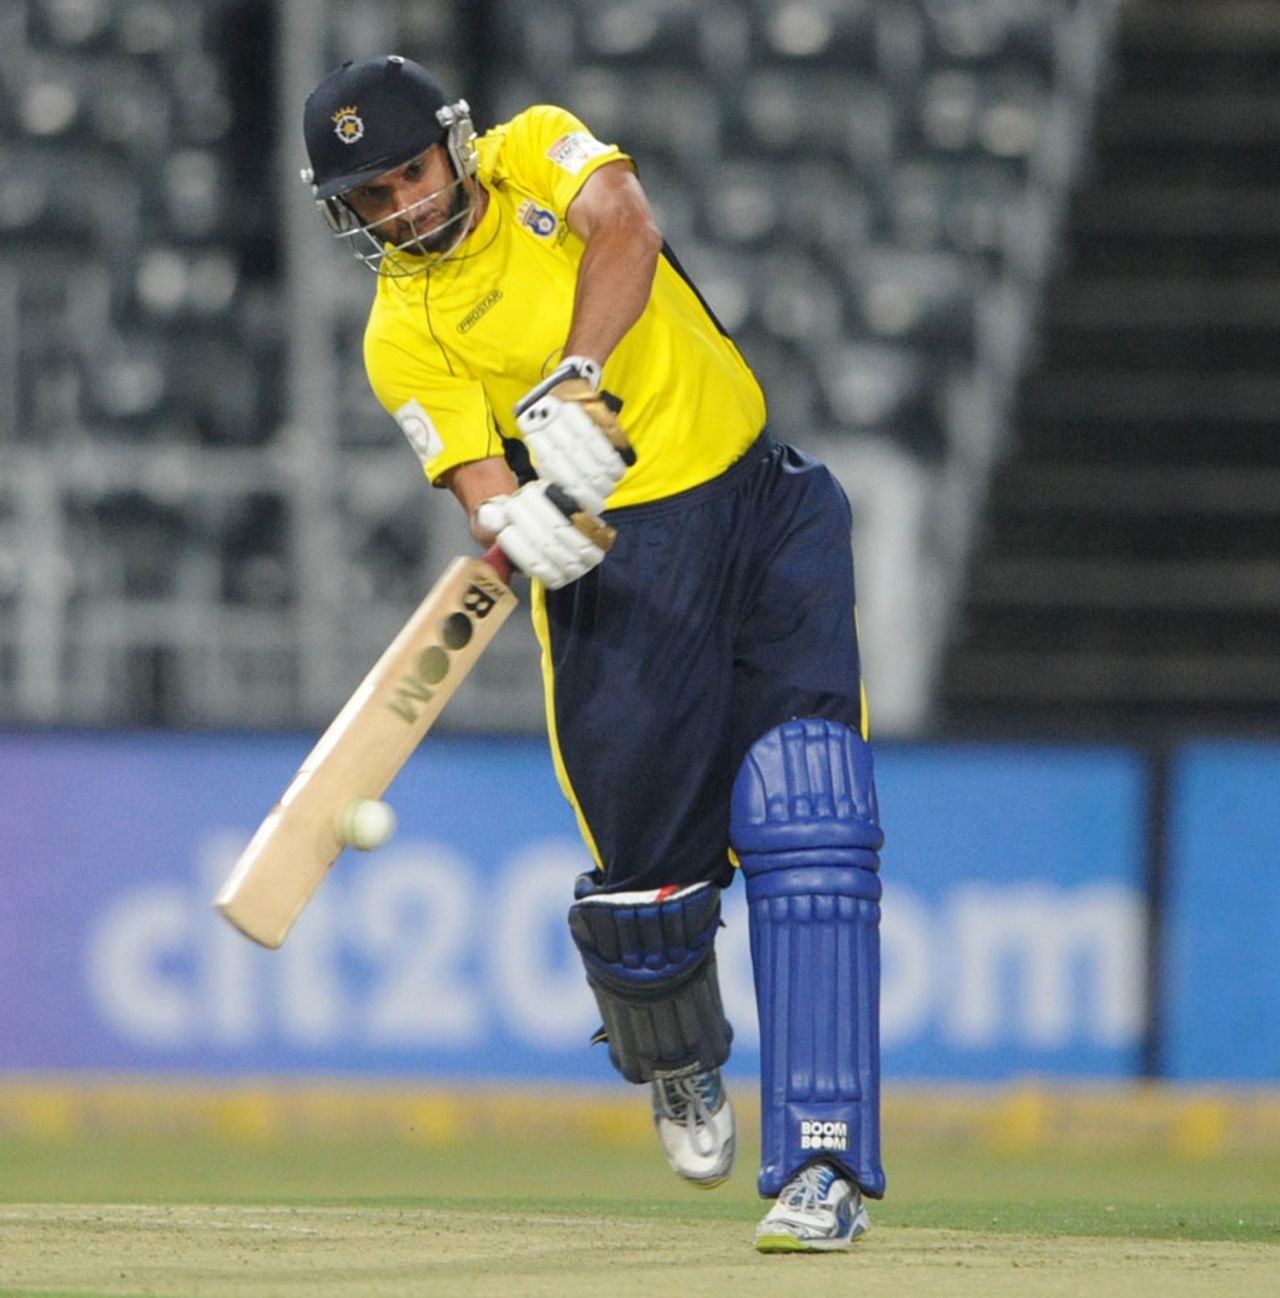 Shahid Afridi made 14 before holing out, Hampshire v Sialkot Stallions, Champions League T20, Johannesburg, October 11, 2012